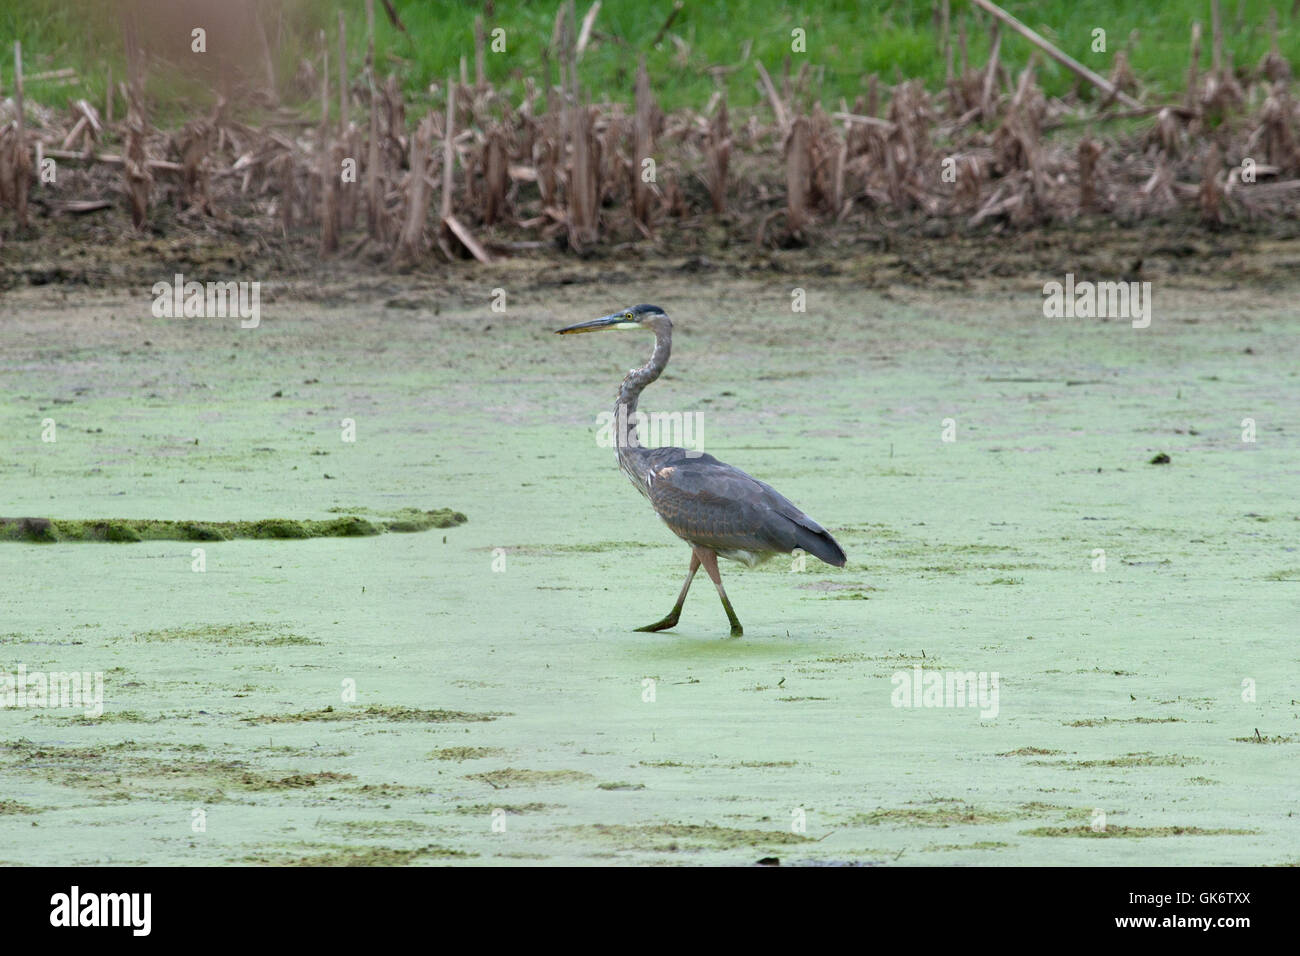 Great blue heron walks in duckweed covered pond Stock Photo